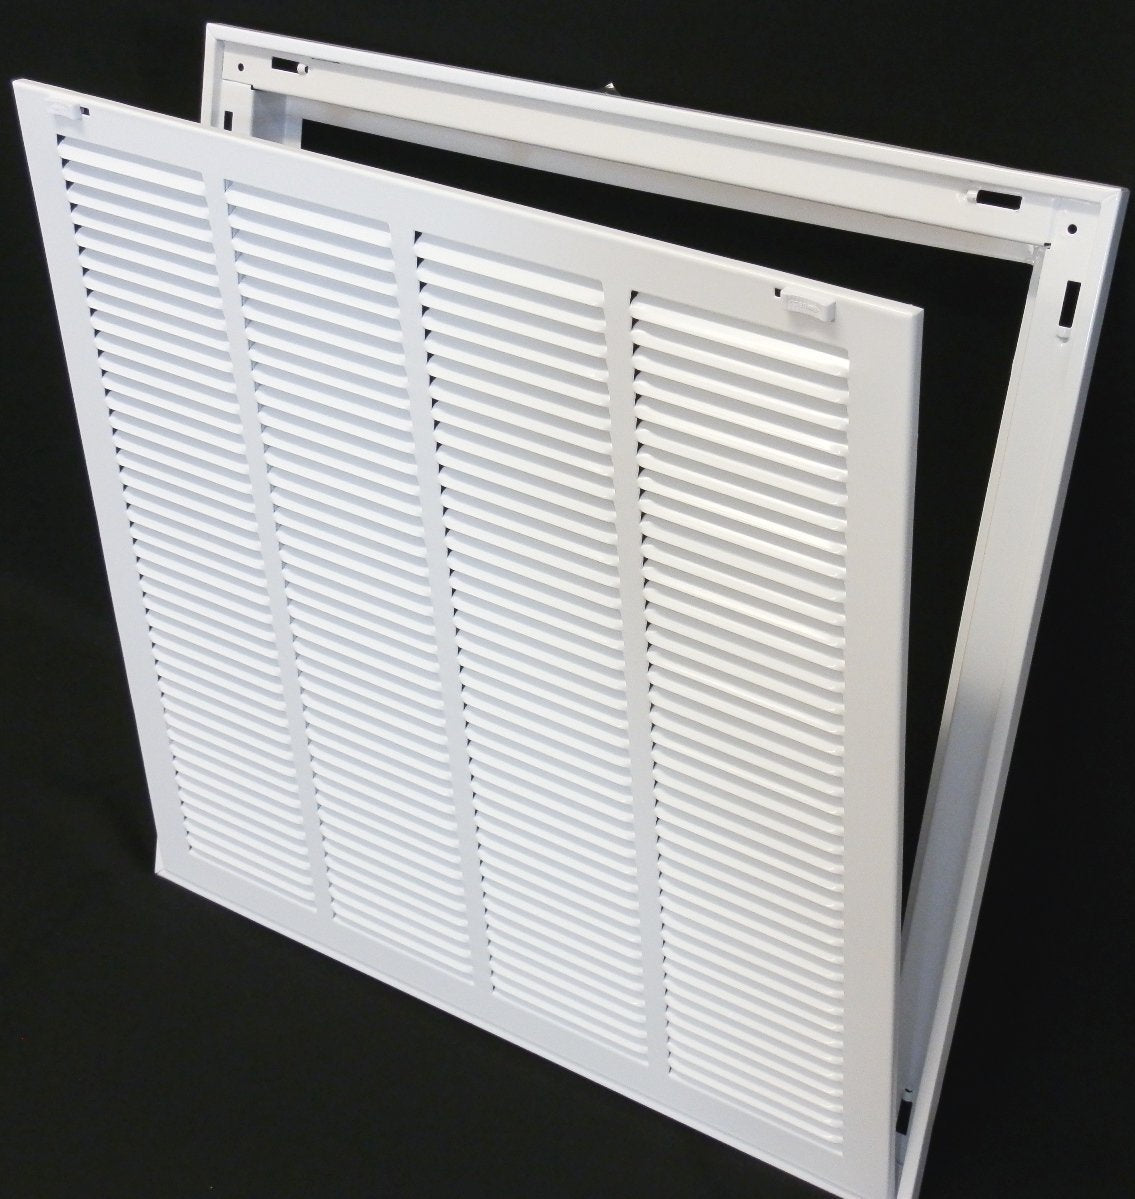 26&quot; X 12&quot; Steel Return Air Filter Grille for 1&quot; Filter - Removable Frame - [Outer Dimensions: 28 5/8&quot; X 14 5/8&quot;]